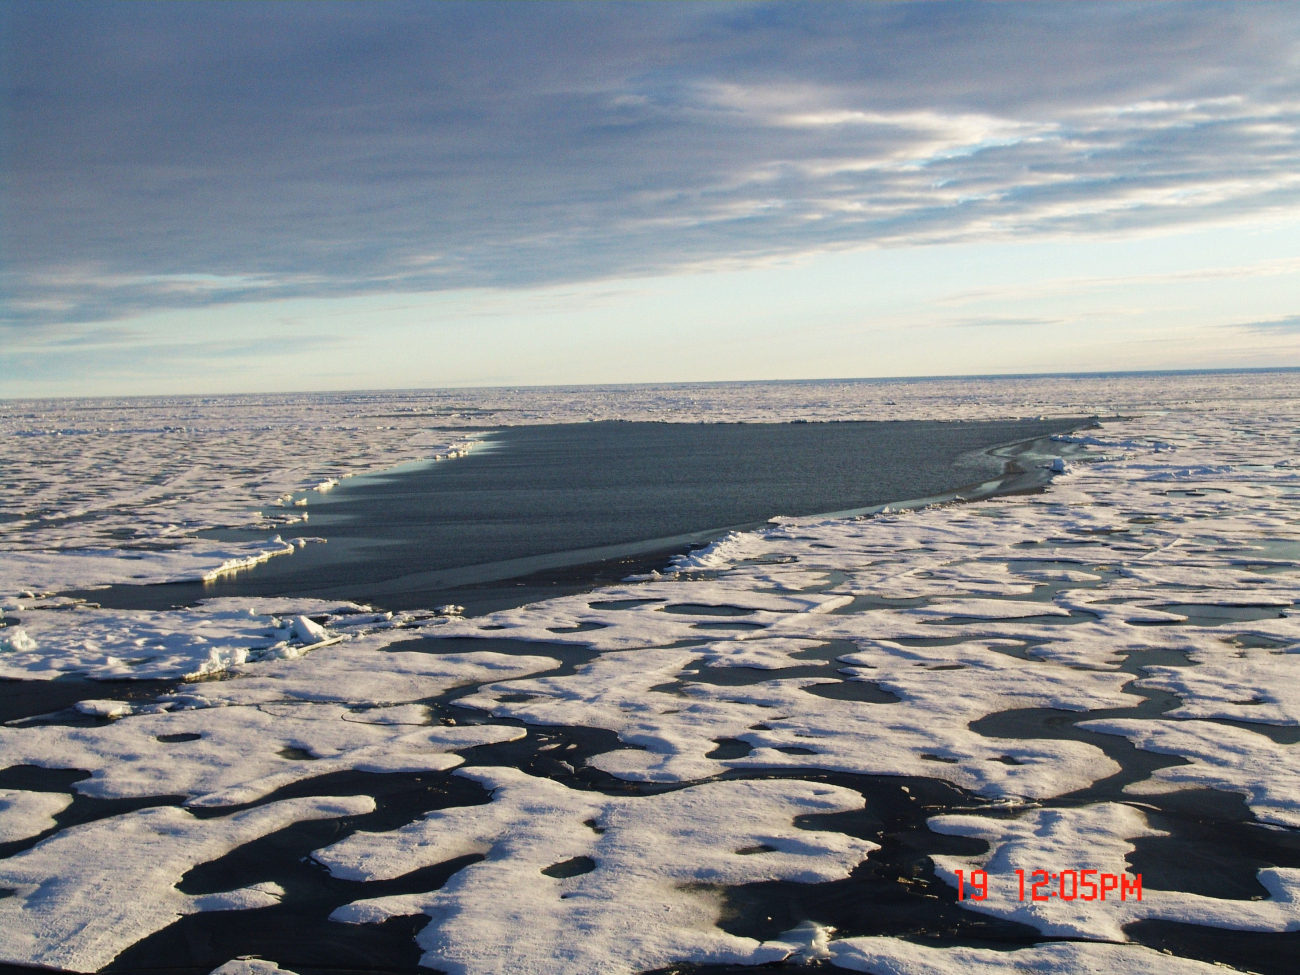 An area of hummocky 2nd year to multi-year ice with melt ponds with a smallpolynya